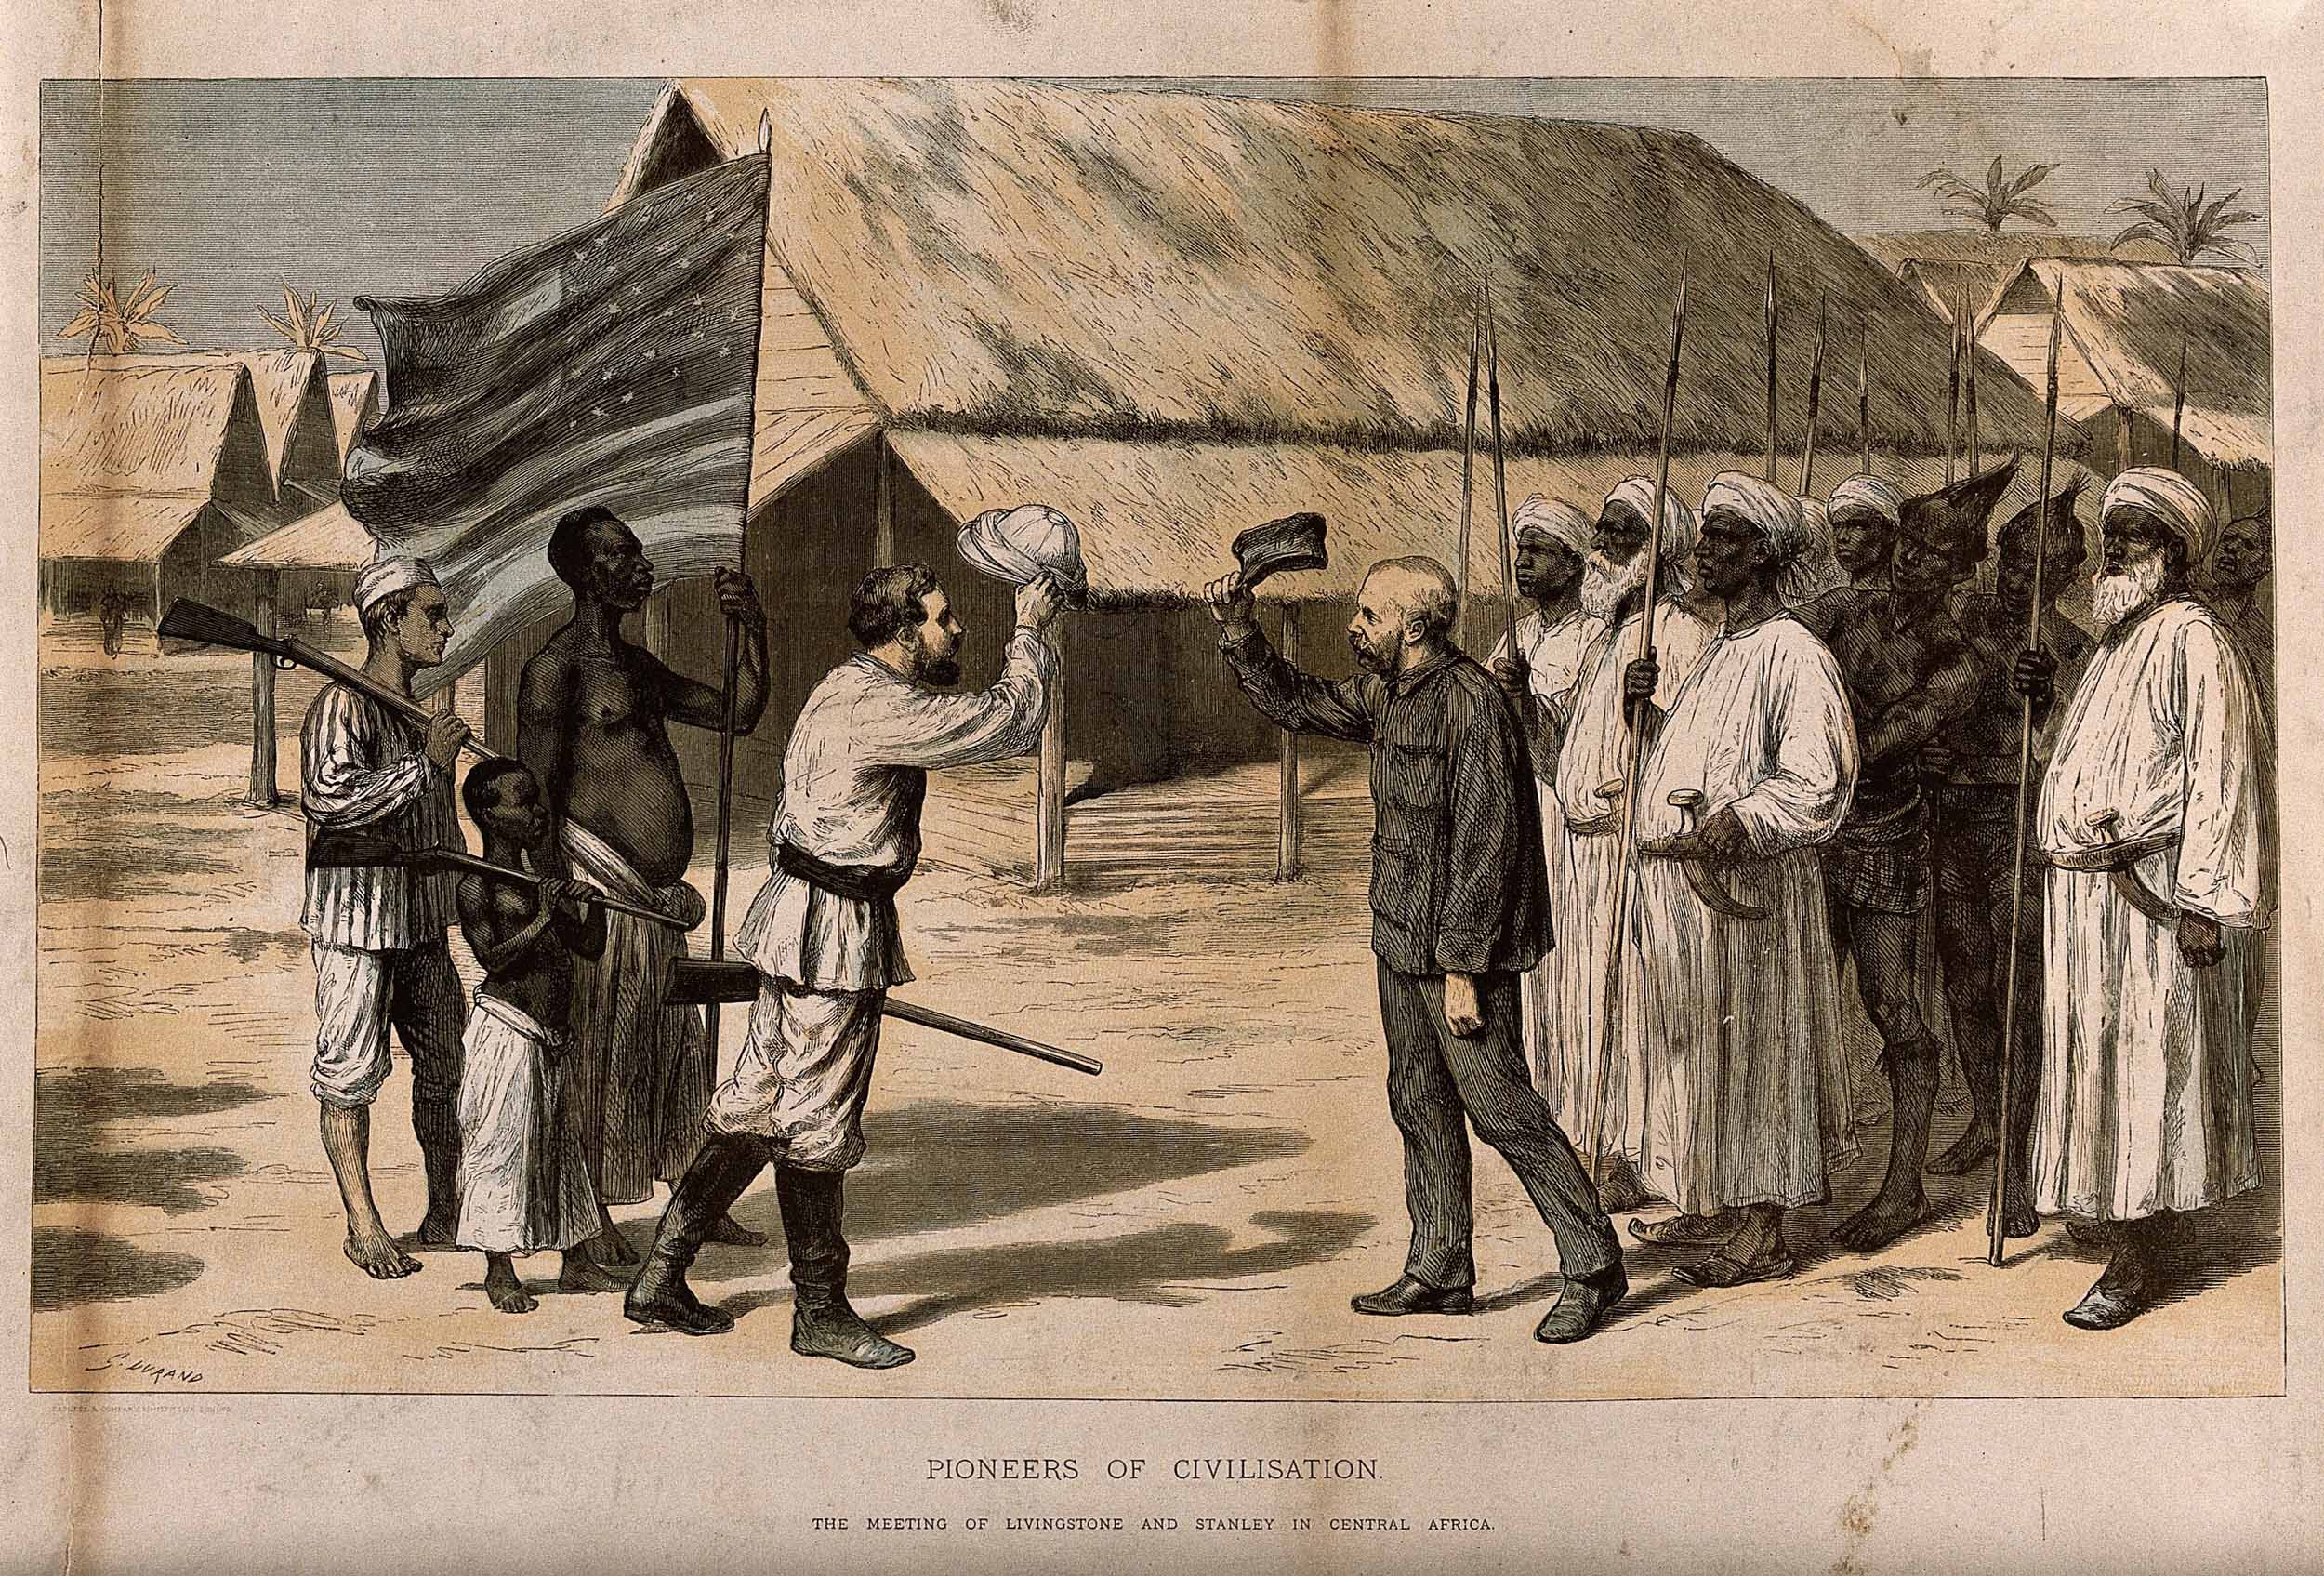 Pioneers of Civilization: The Meeting of Livingstone and Stanley in Central Africa. Copyright Wellcome Library, London. Creative Commons Attribution 4.0 International (https://creativecommons.org/licenses/by/4.0/).